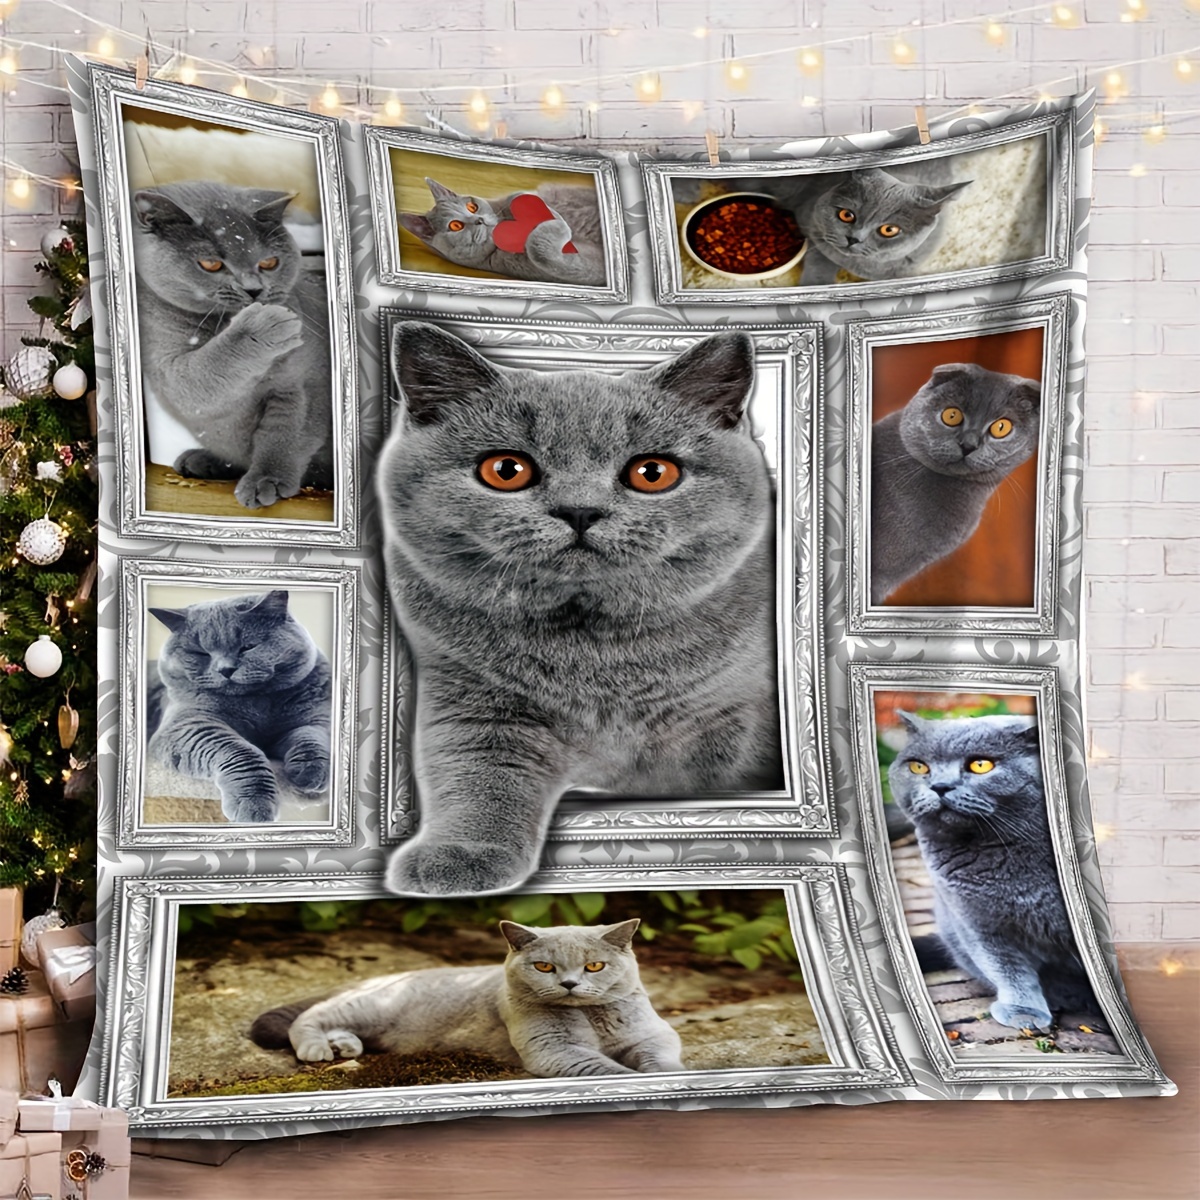 

1pc Gift Blanket For Cat Lovers Creative Stitching Pattern Soft Blanket Flannel Blanket For Couch Sofa Office Bed Camping Travel, Multi-purpose Gift Blanket For All Season